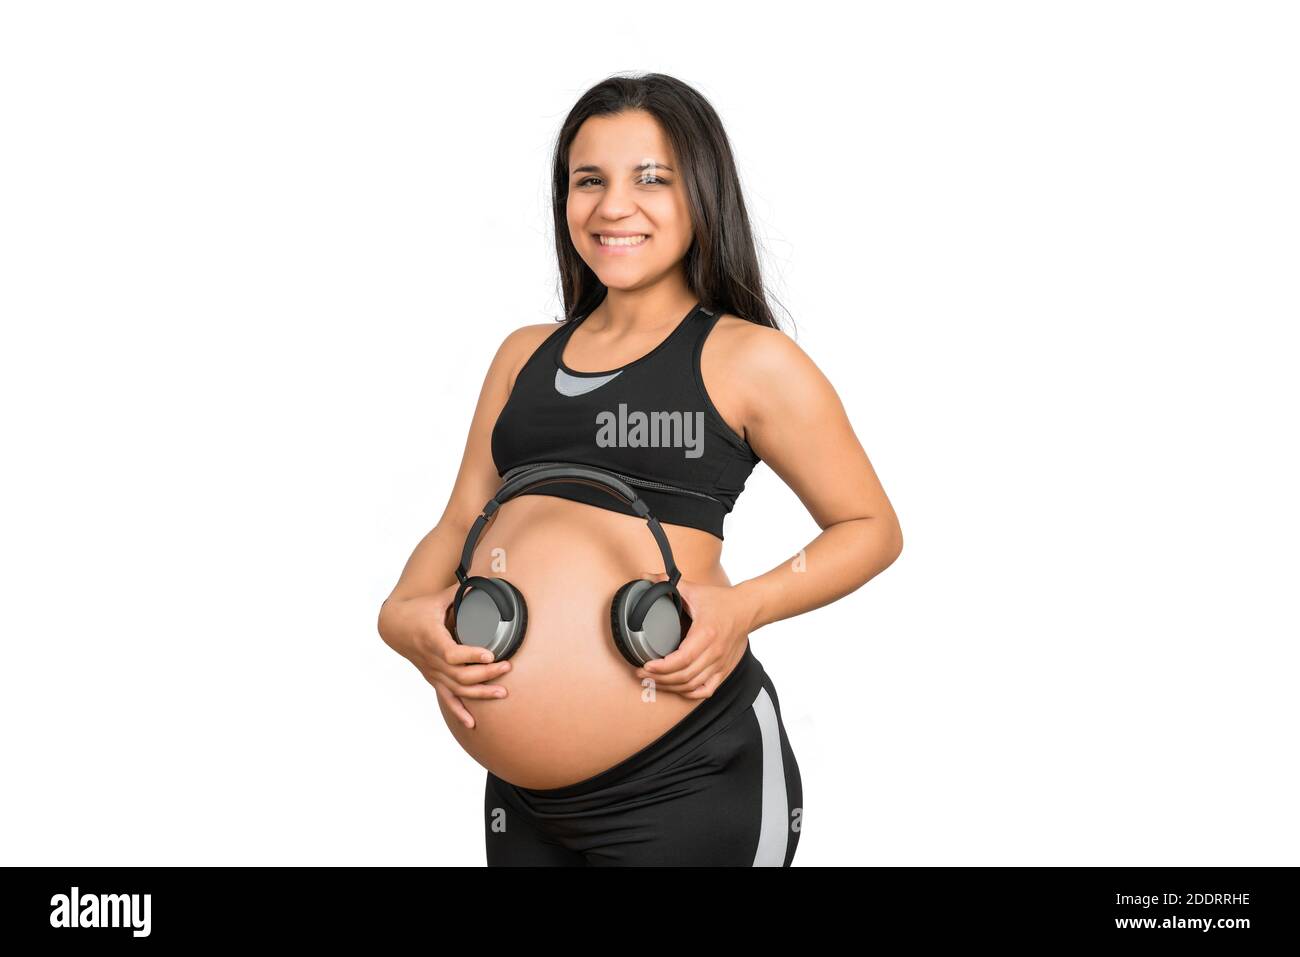 Pregnant Woman Playing Music To Her Baby With Headphones On Belly Stock  Photo, Picture and Royalty Free Image. Image 116985232.